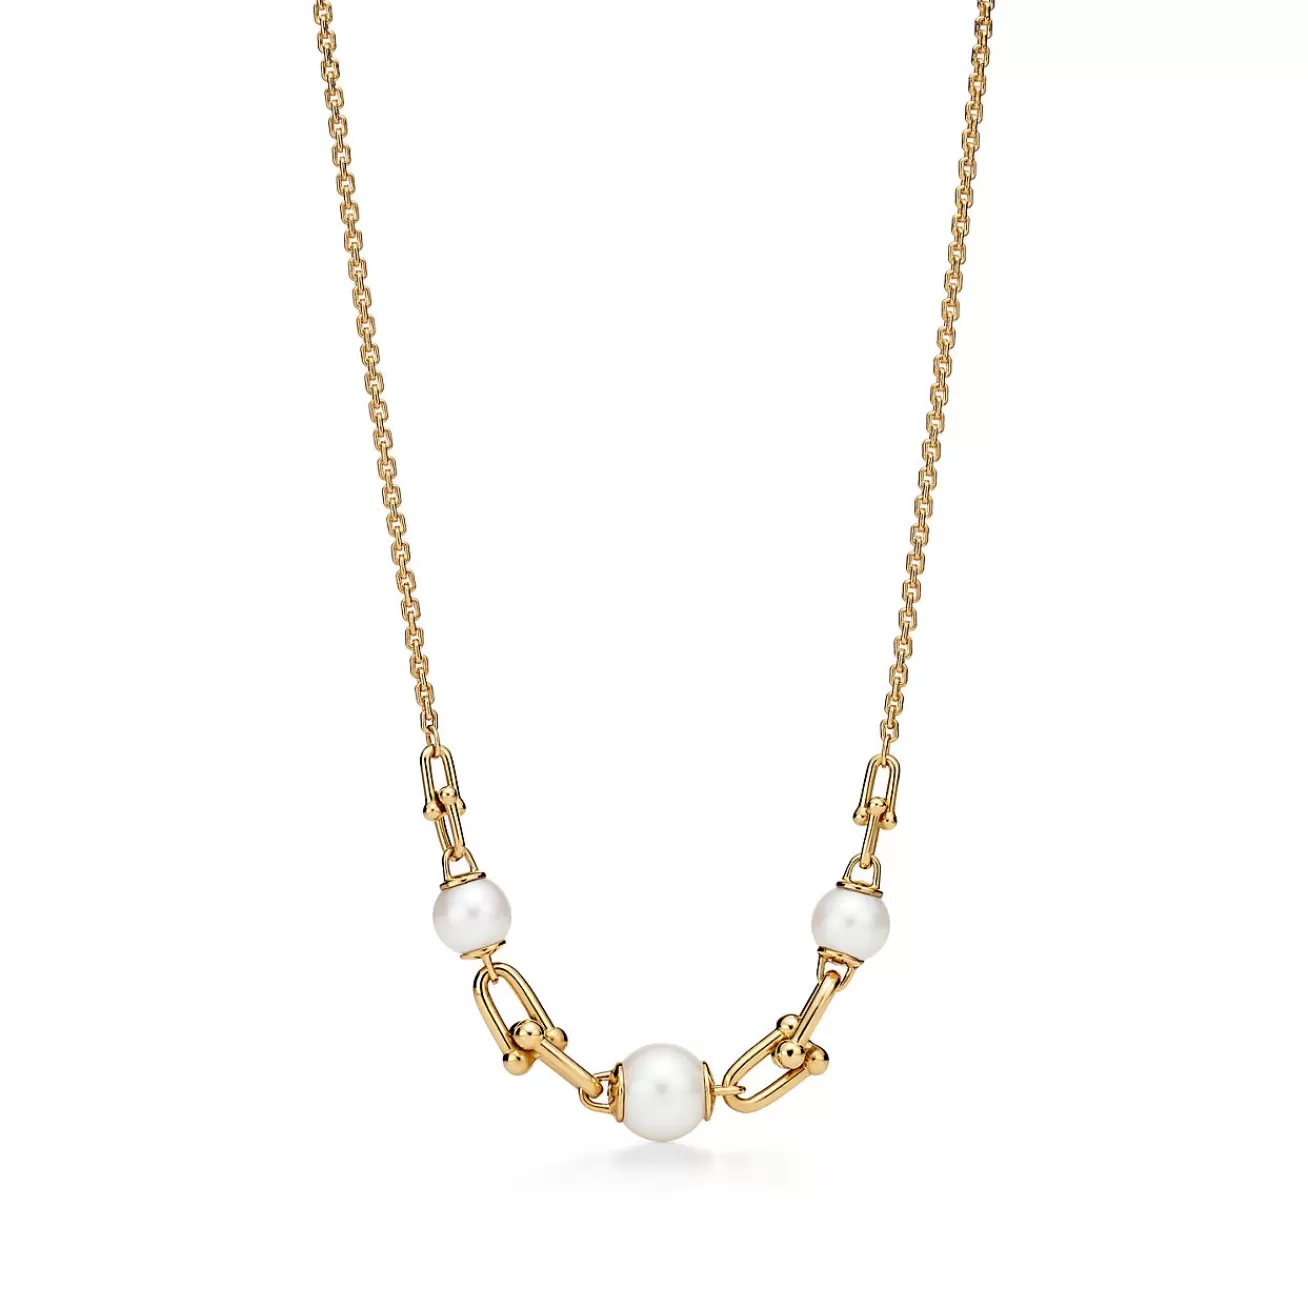 Tiffany & Co. Tiffany HardWear Link Necklace in Yellow Gold with Freshwater Pearls | ^ Necklaces & Pendants | Gold Jewelry